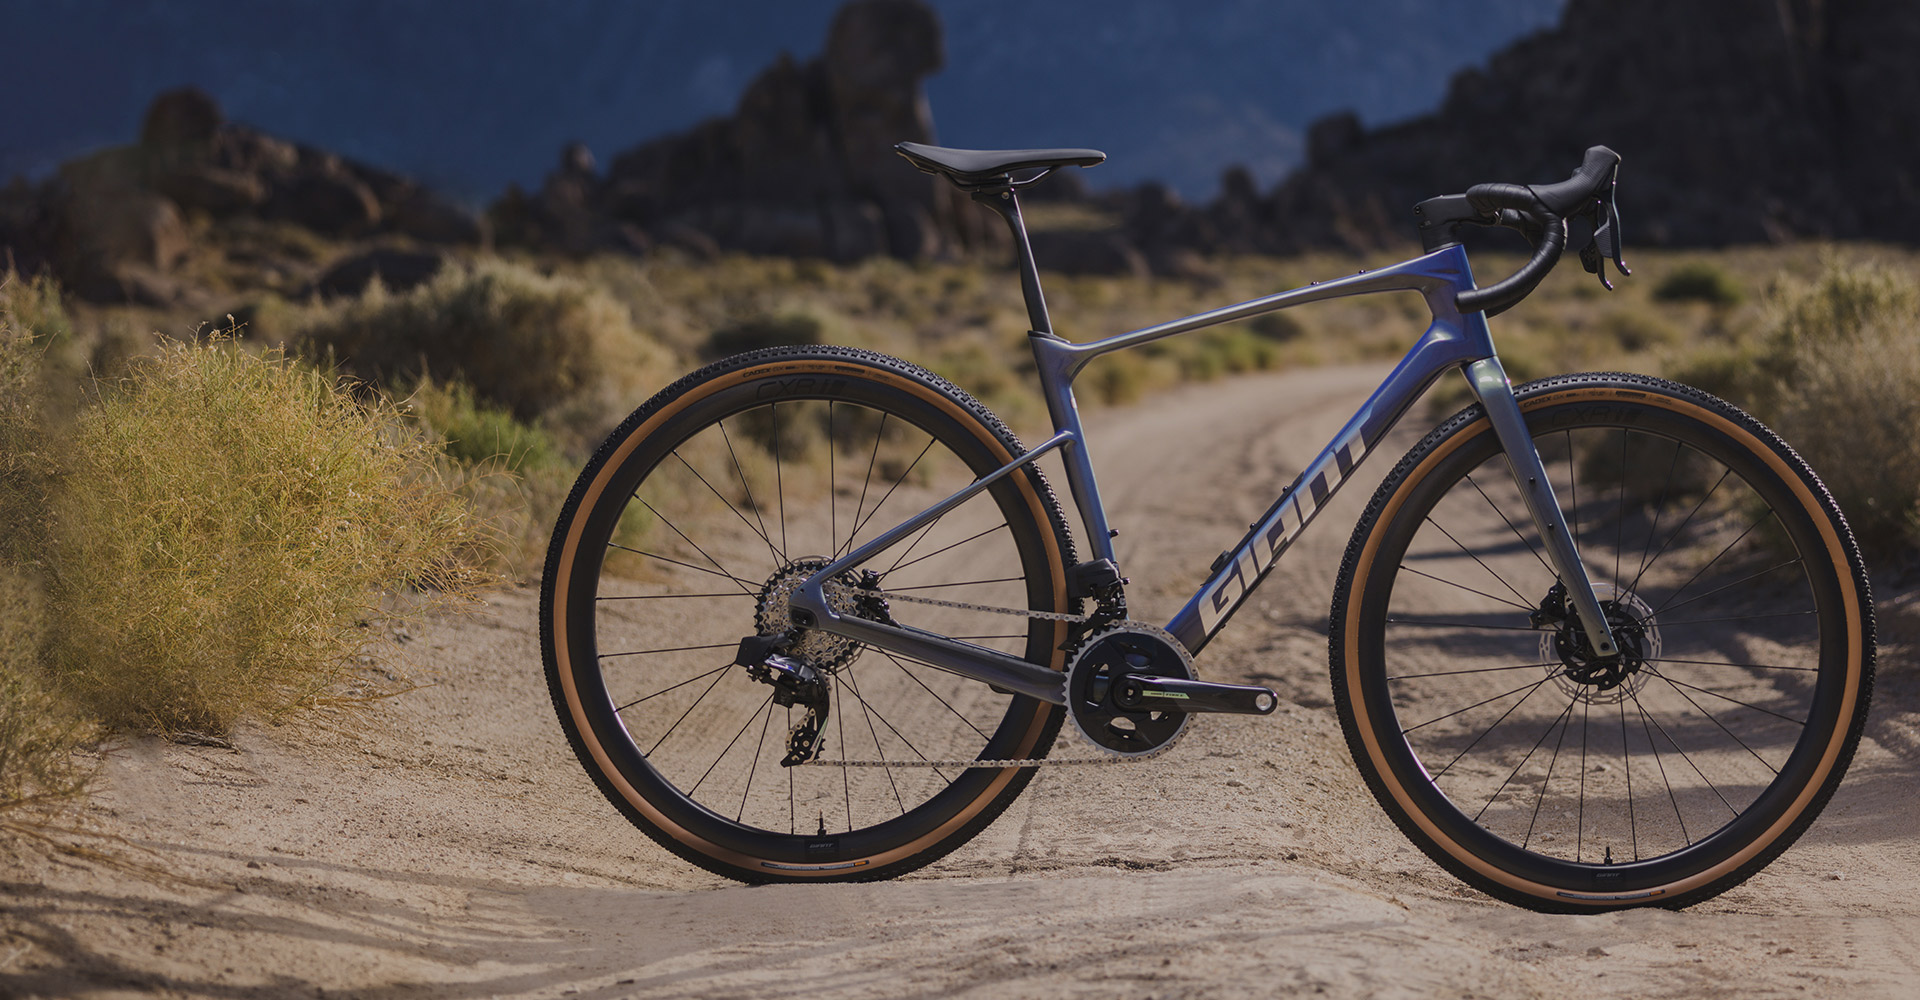 Giant Bicycles | The world's leading brand of bicycles and cycling gear